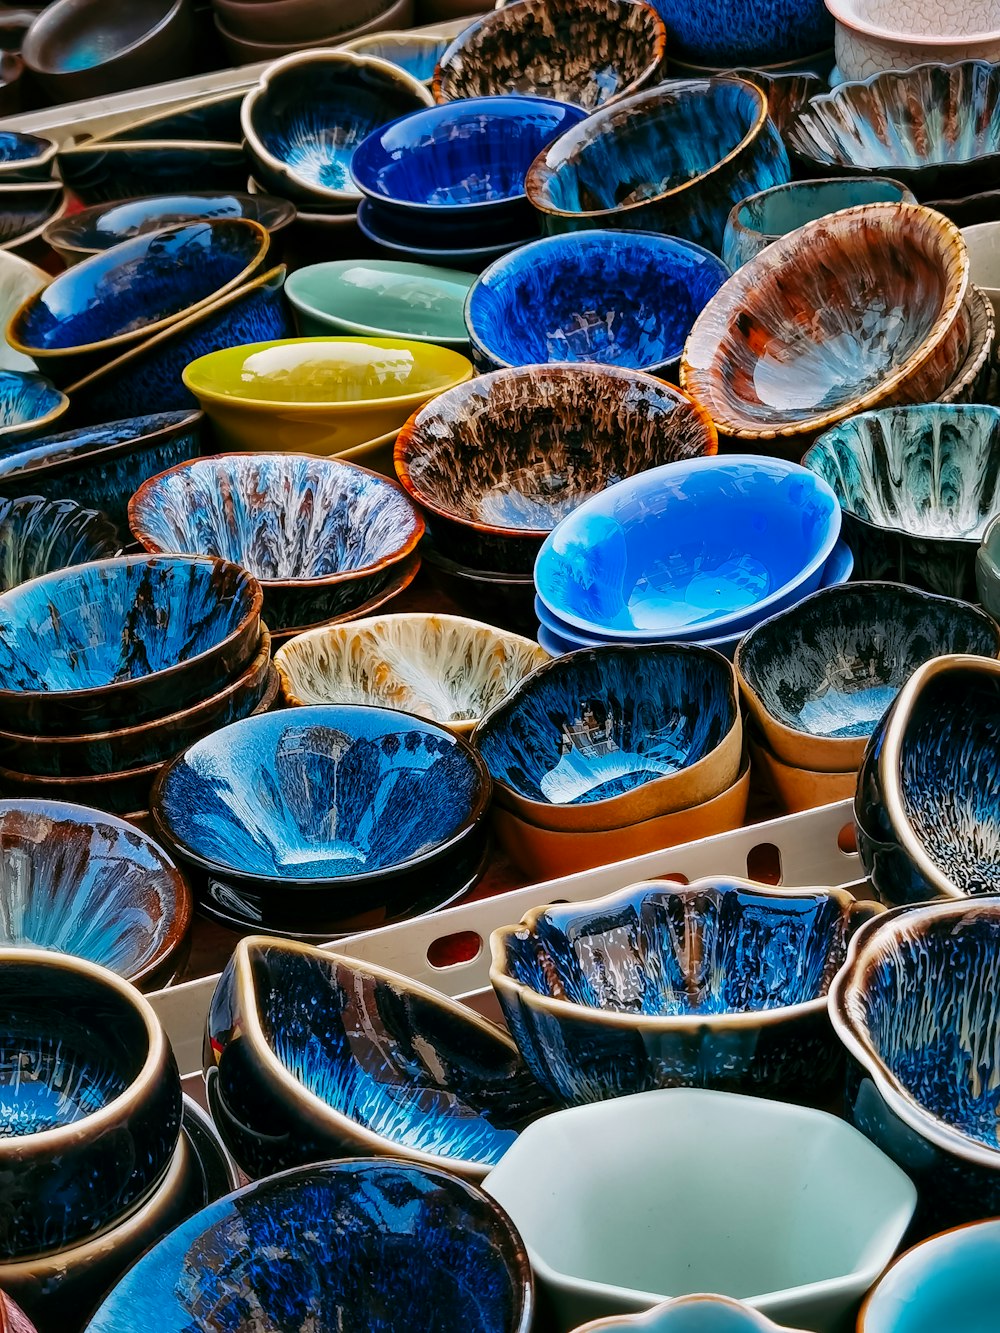 blue and yellow plastic bowls